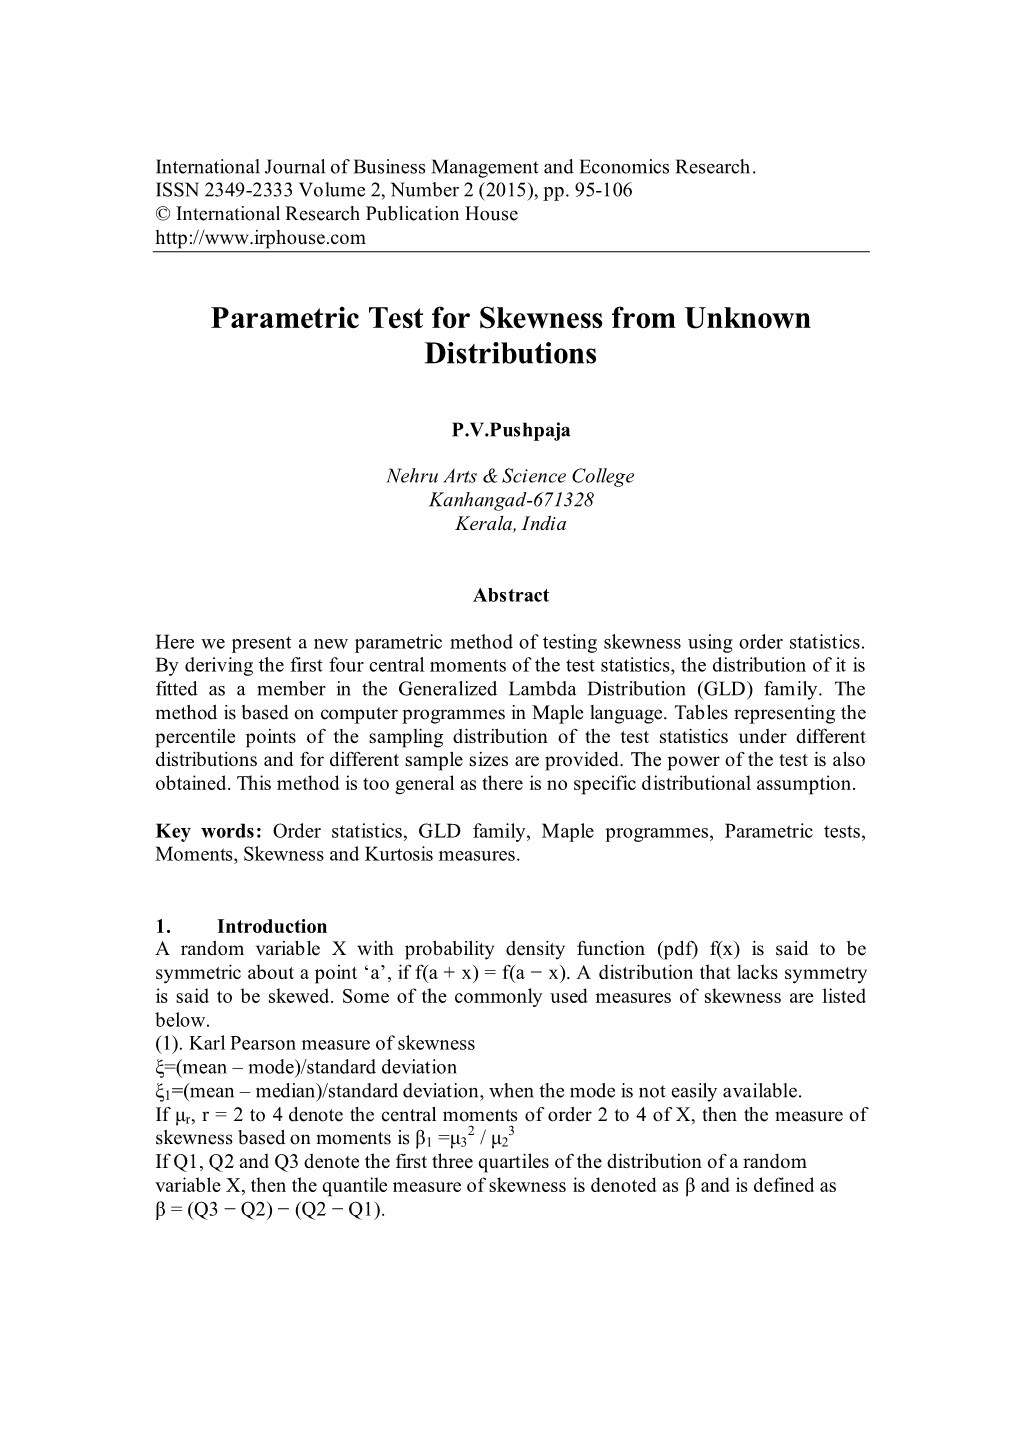 Parametric Test for Skewness from Unknown Distributions